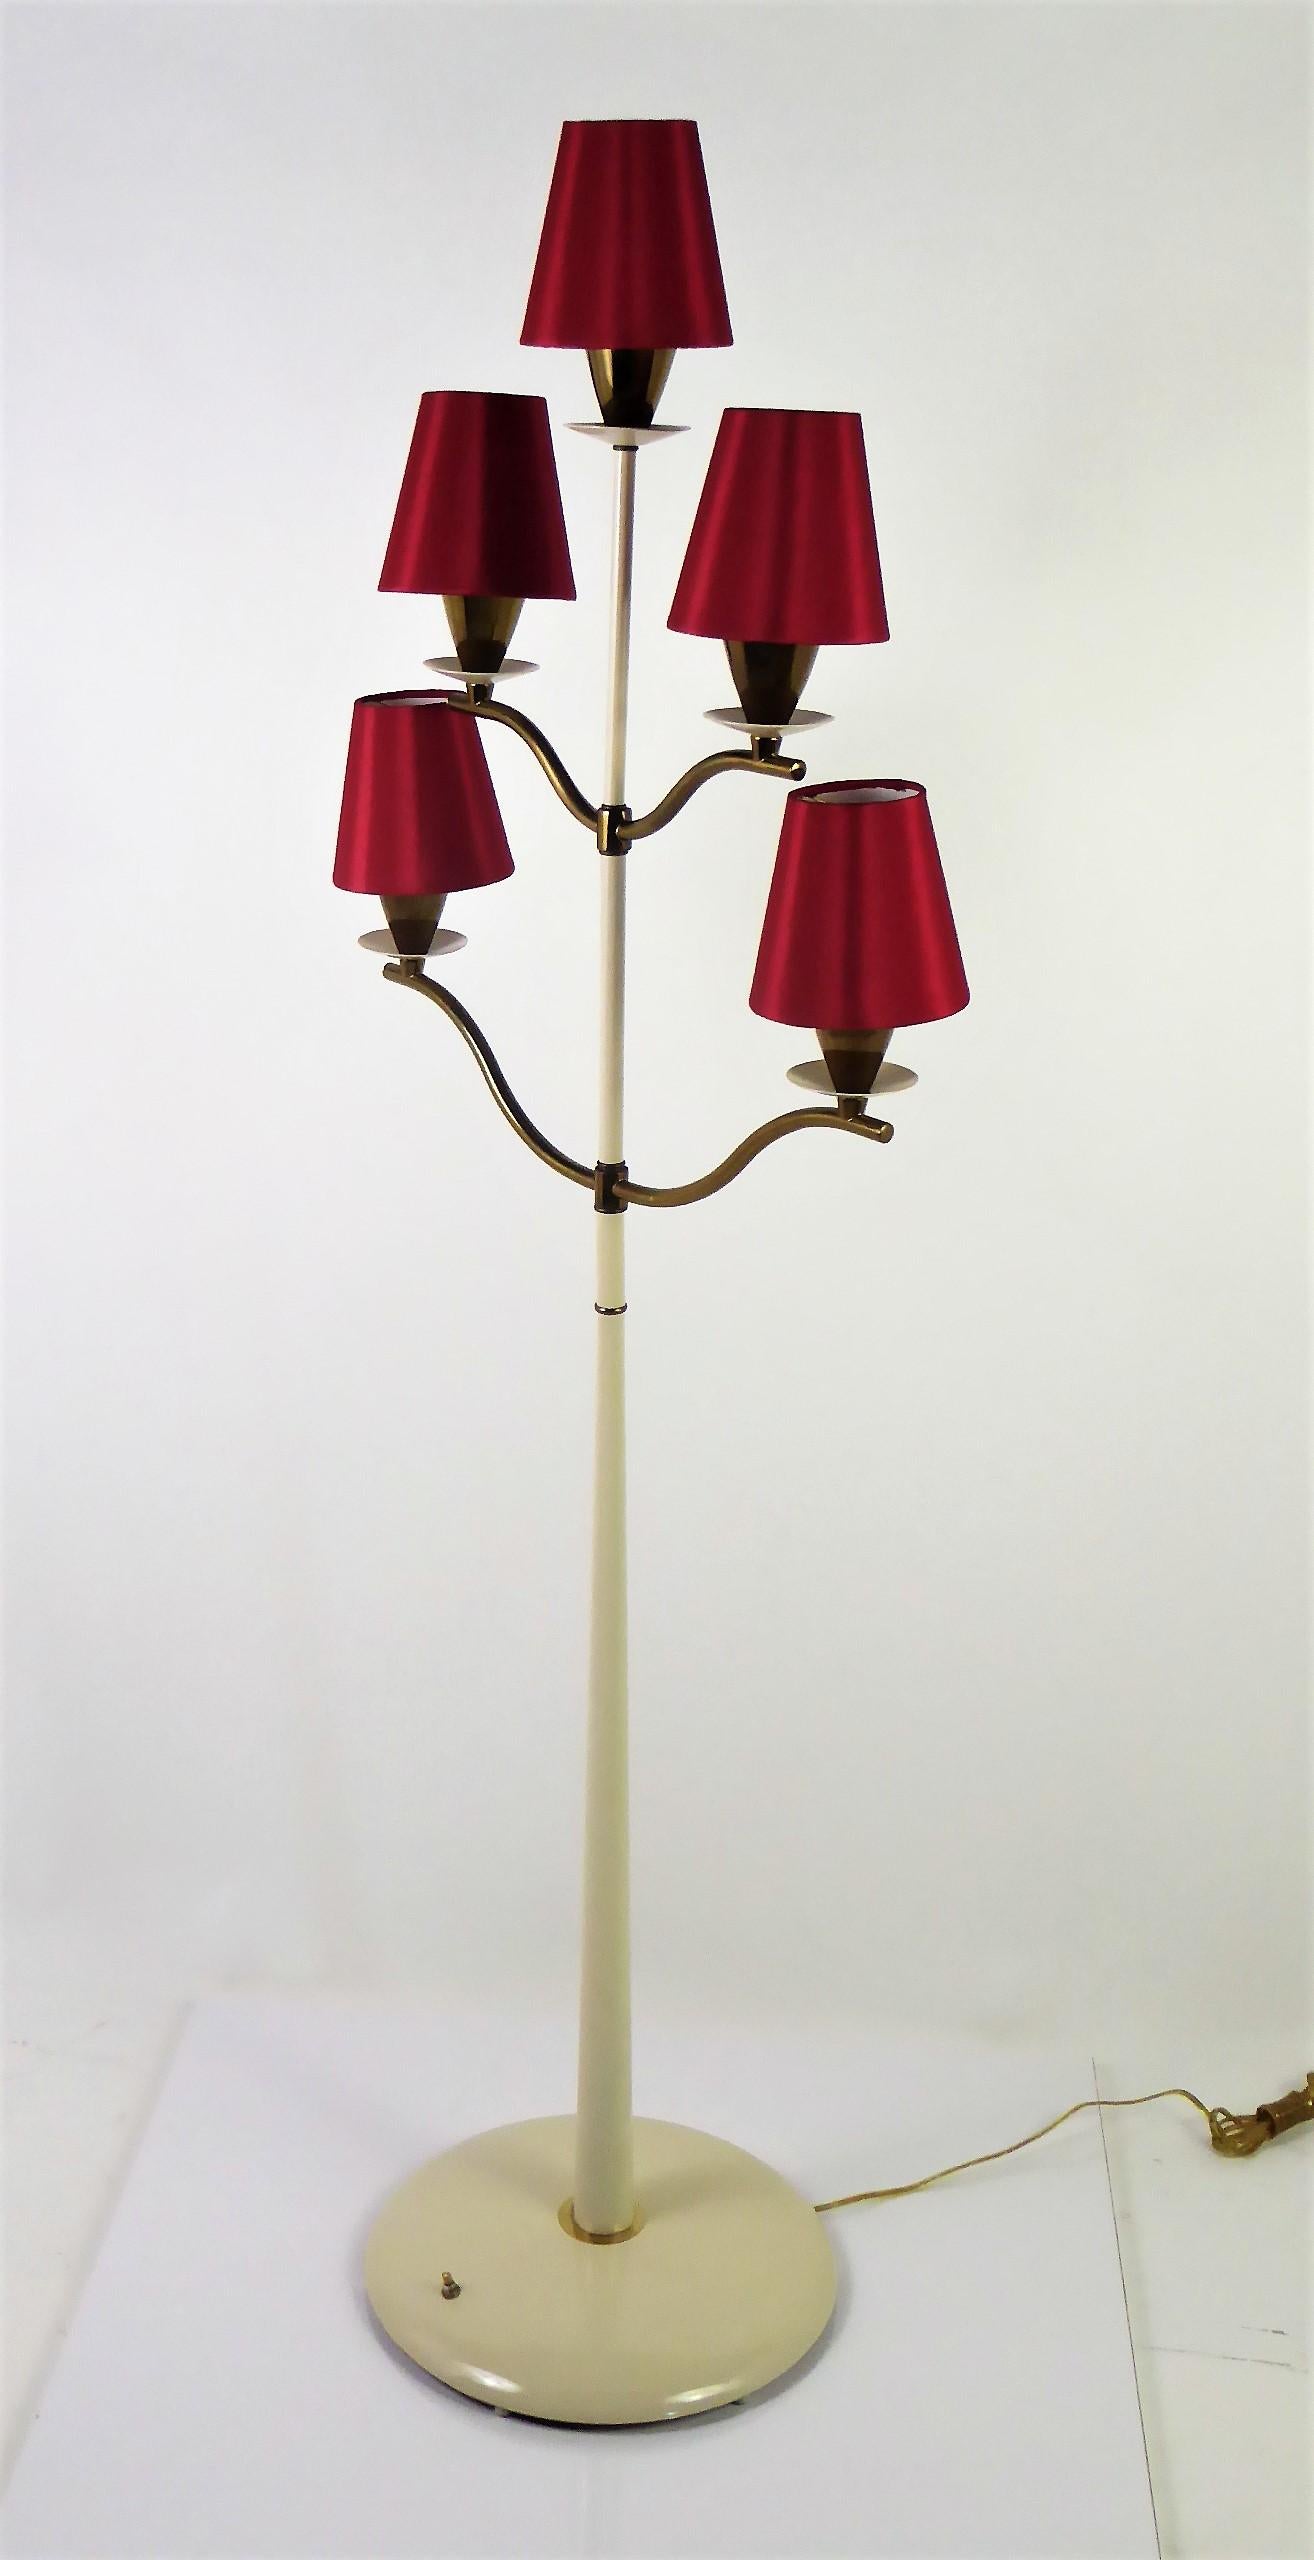 1940s elegant five-light candelabra floor lamp in the style of Pietro Chiesa. With dark brass arms and trims with a creamy white base and rising pole supporting the arms. Newly rewired and has foot switch on base, controlling variable on/offs. New